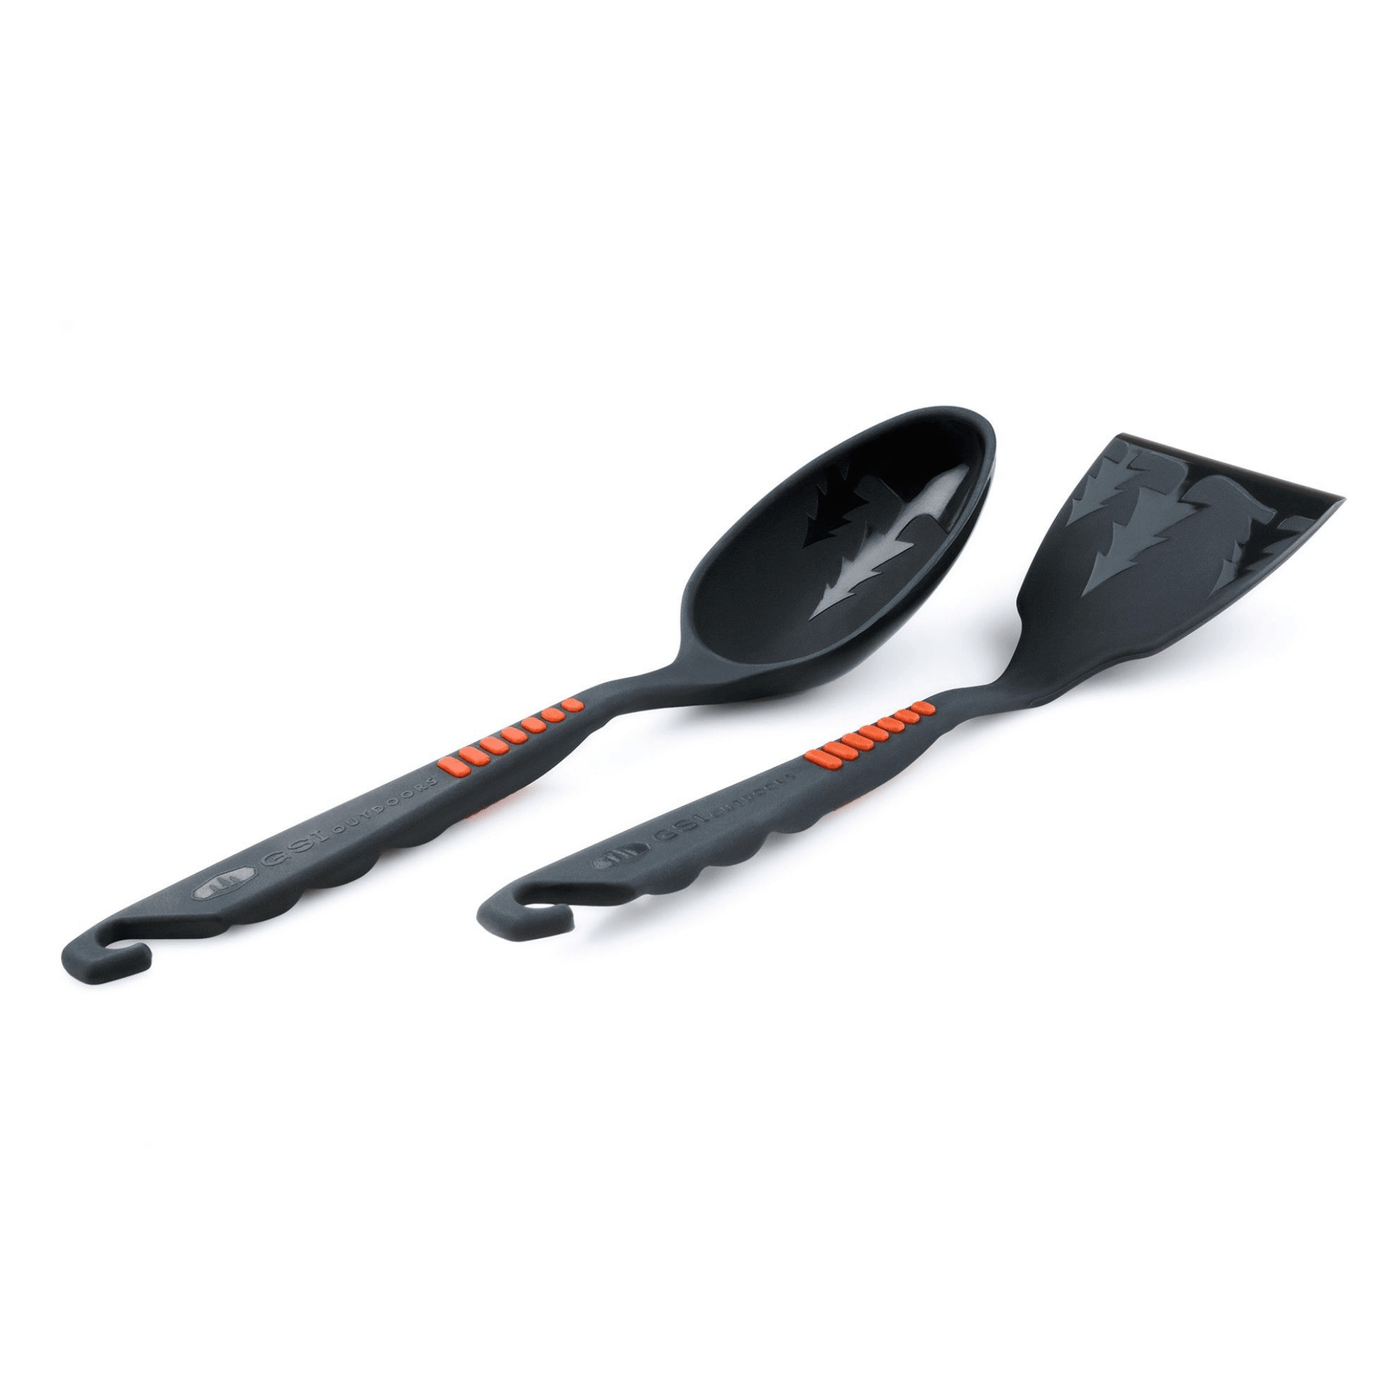 GSI Pack Spoon/Spatula Set | Camping & Backcountry Cooking Utensils | Further Faster Christchurch NZ